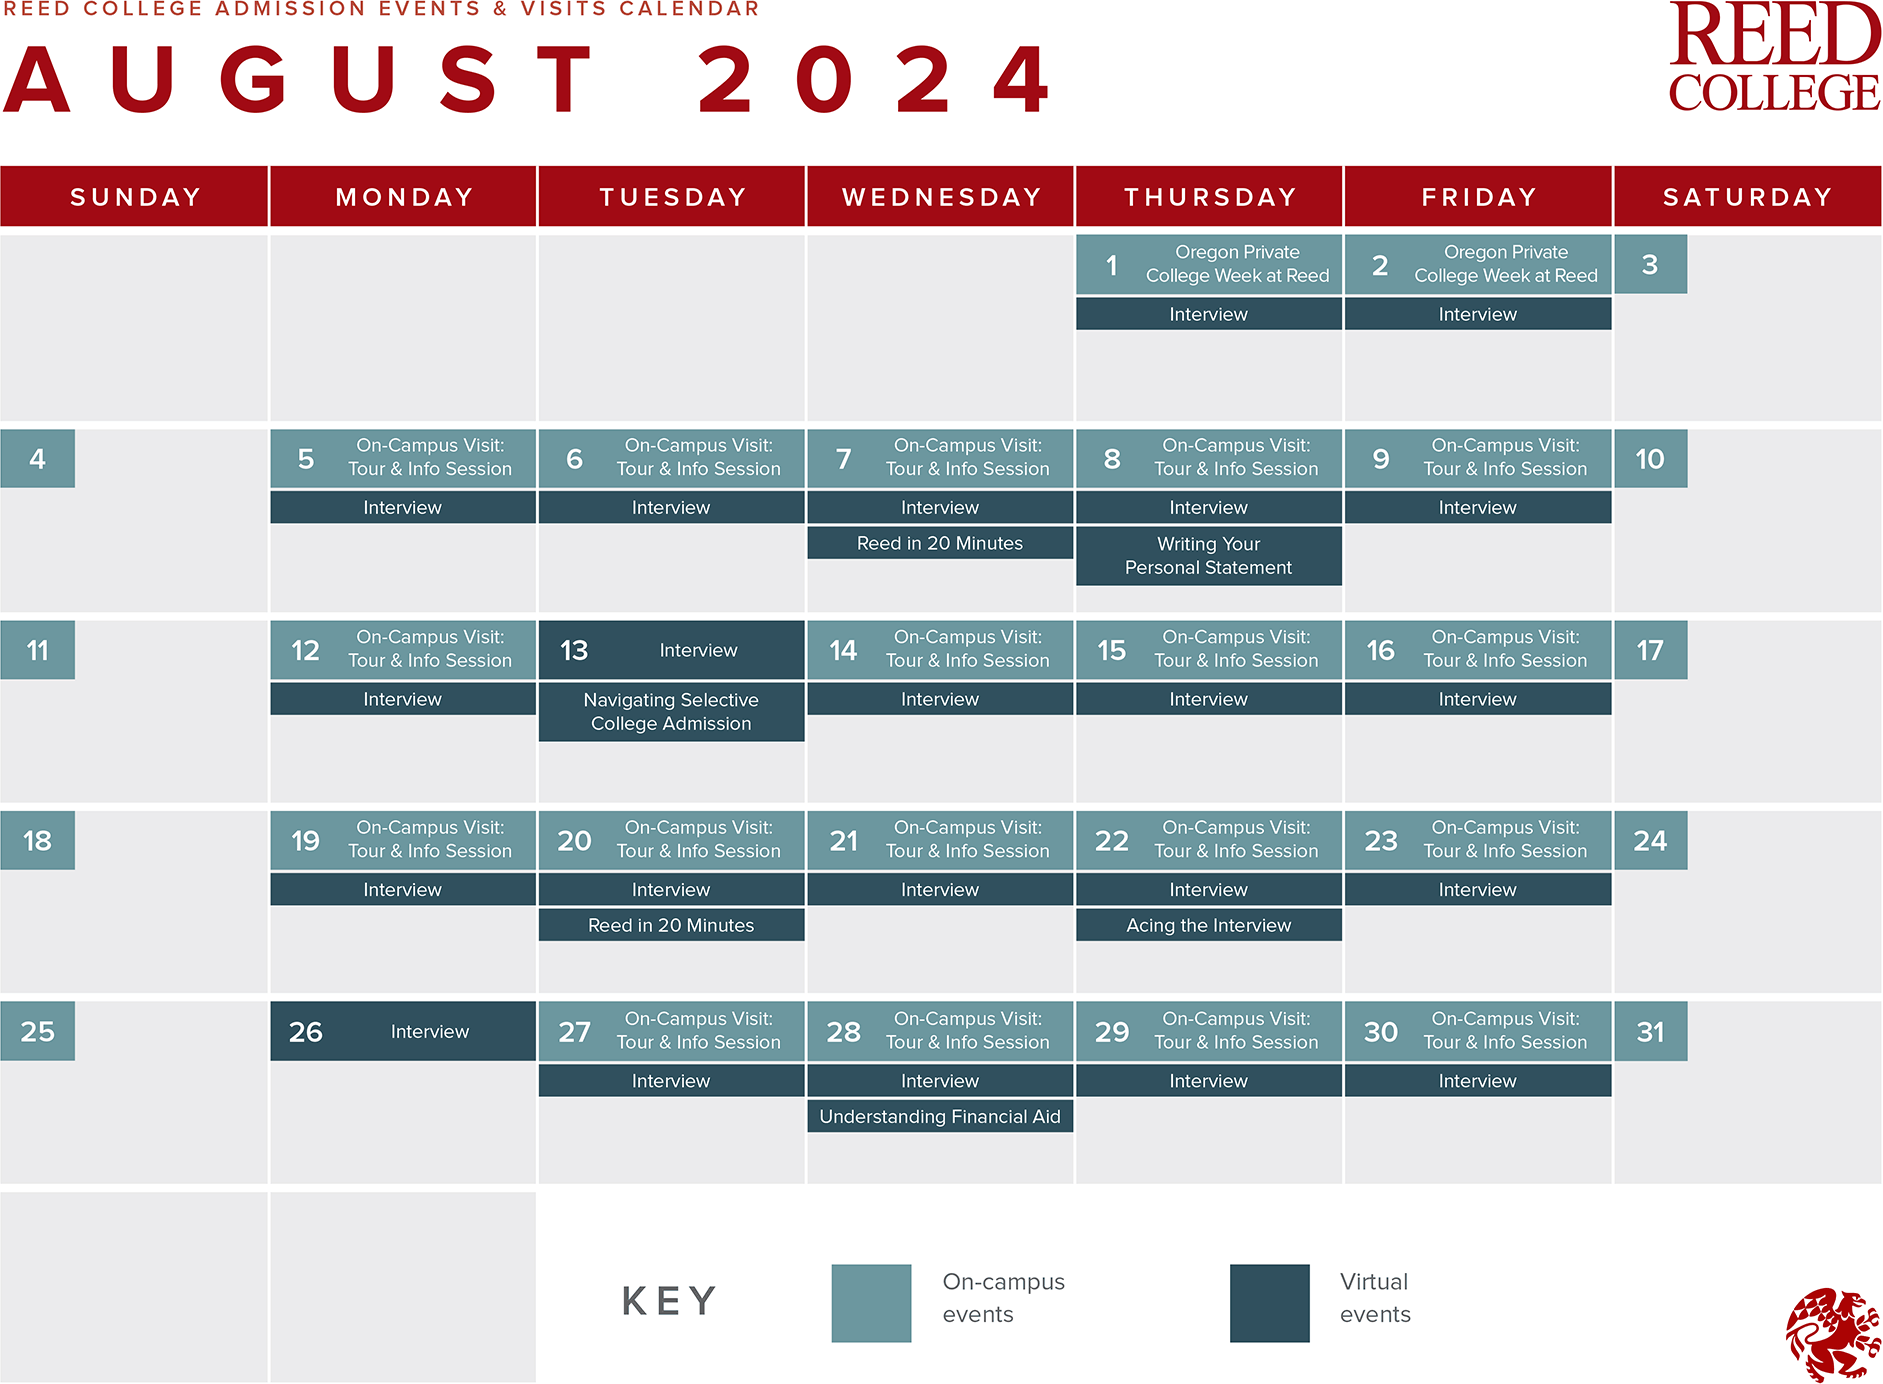 August 2024 Admission events calendar